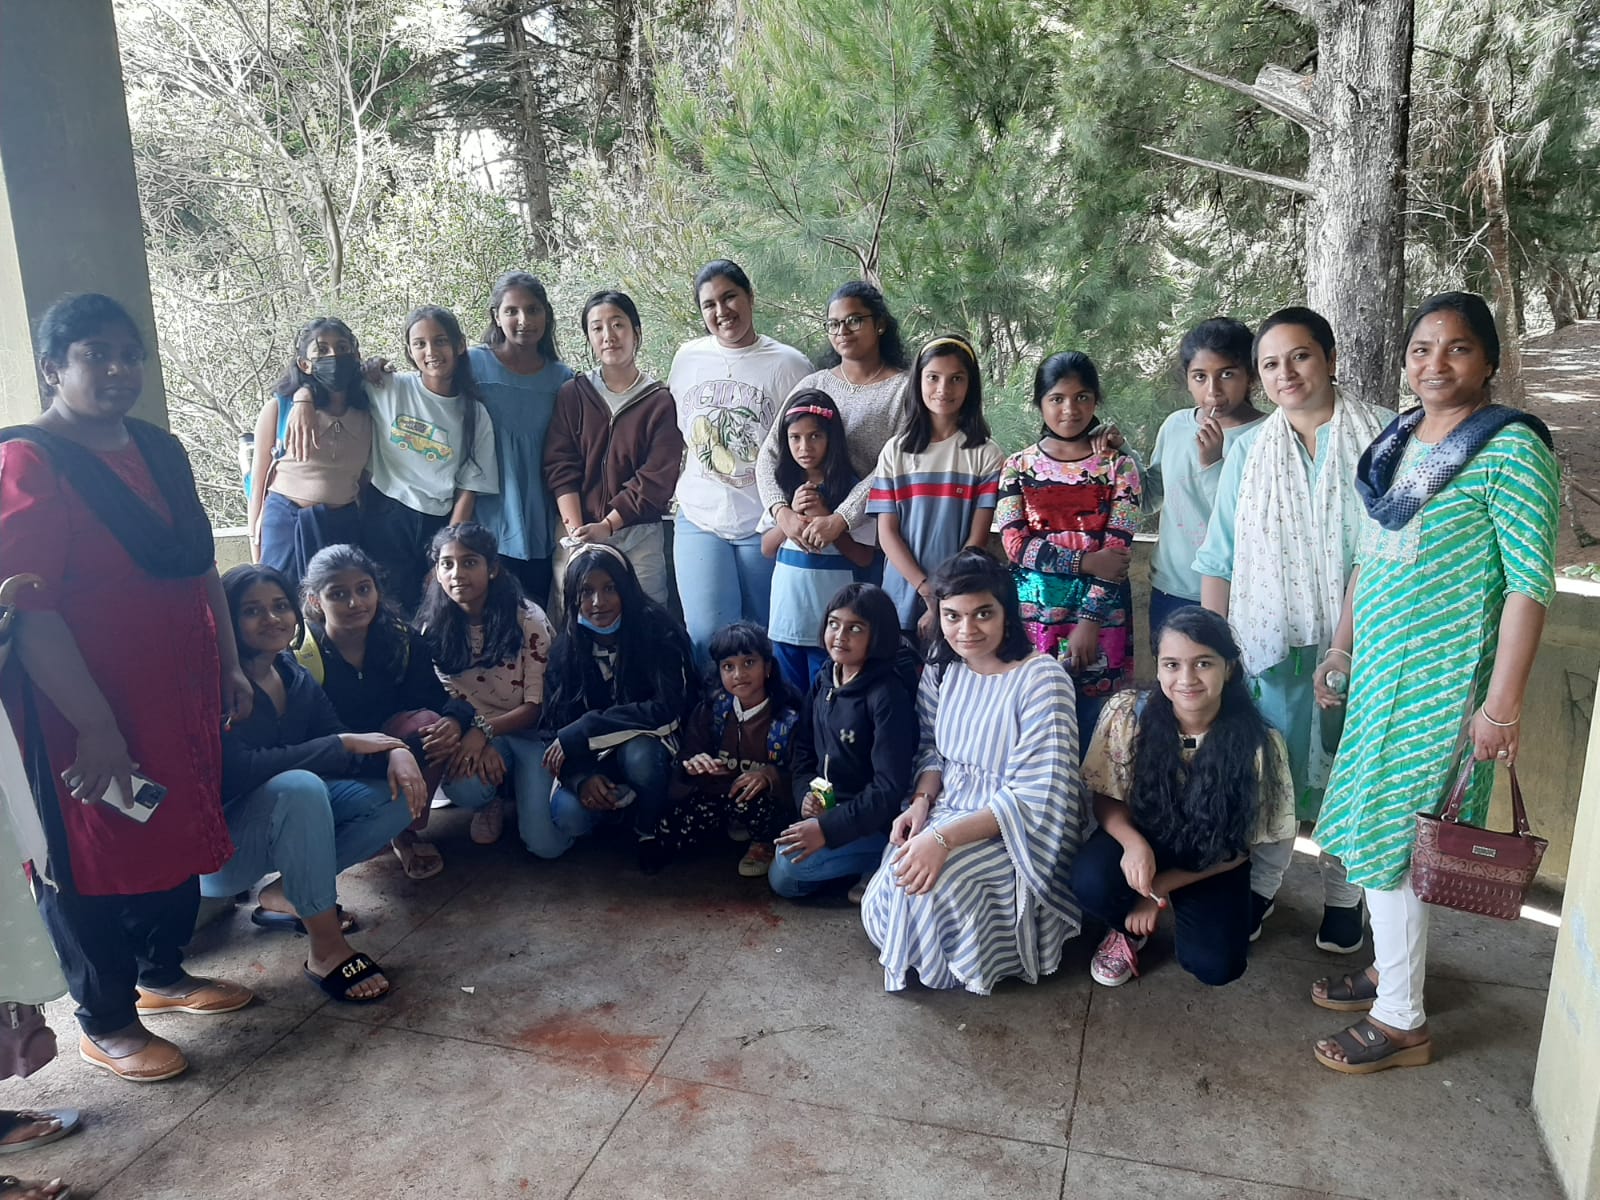 jssps-students-and-teachers-at-cairn-hill-and-karnataka-garden-ooty